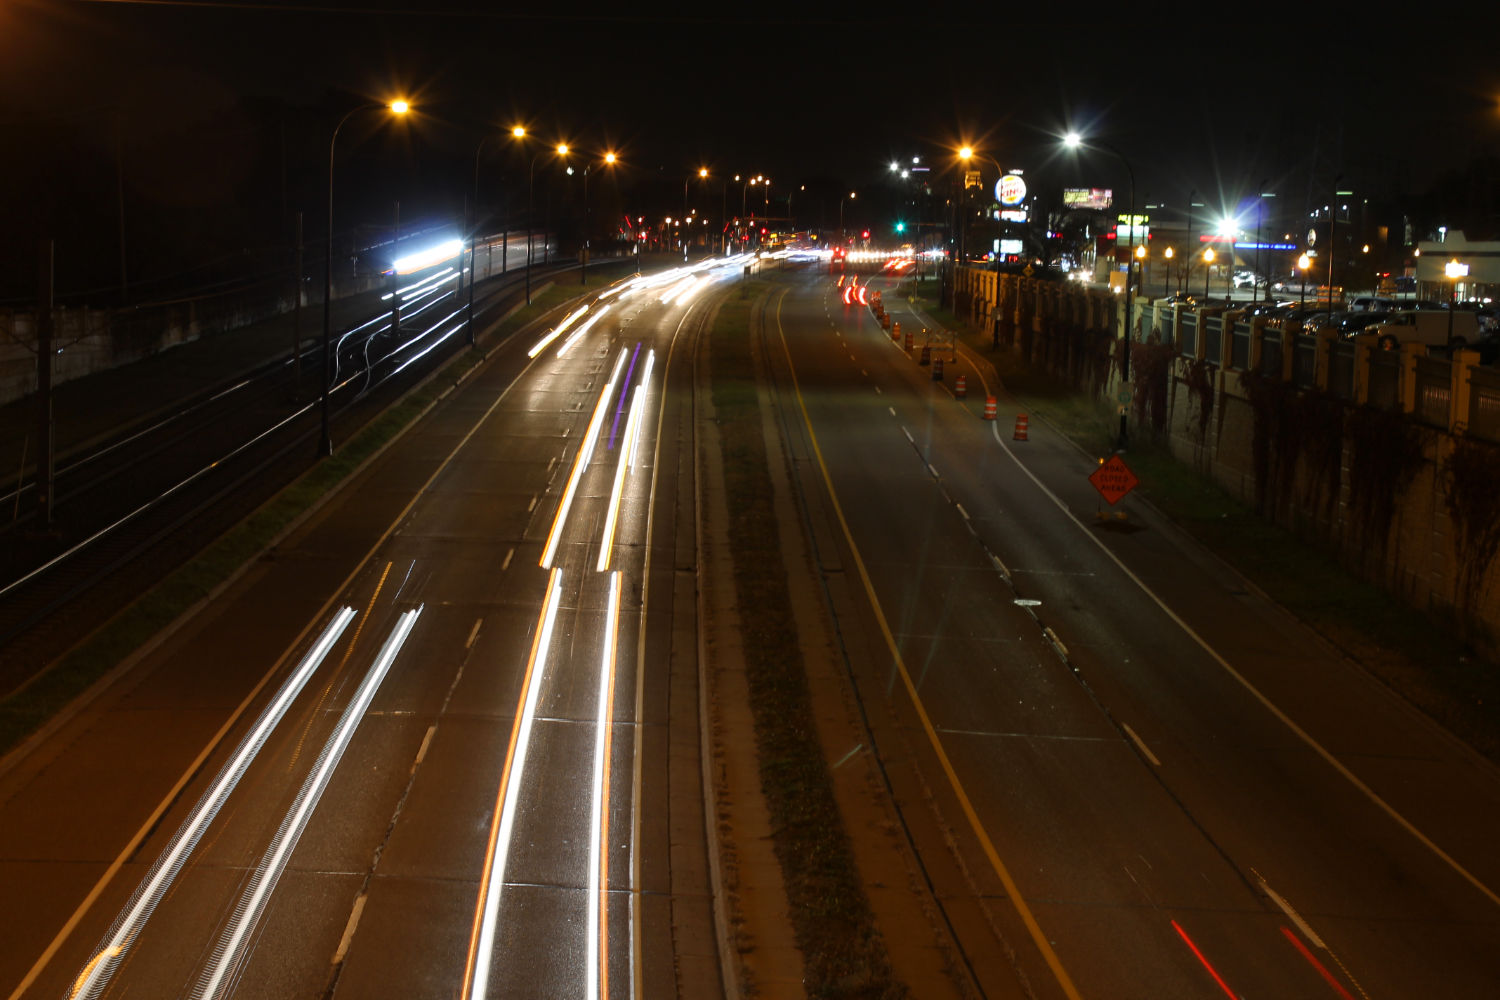 Streaming car lights on highway at night seen from overpass